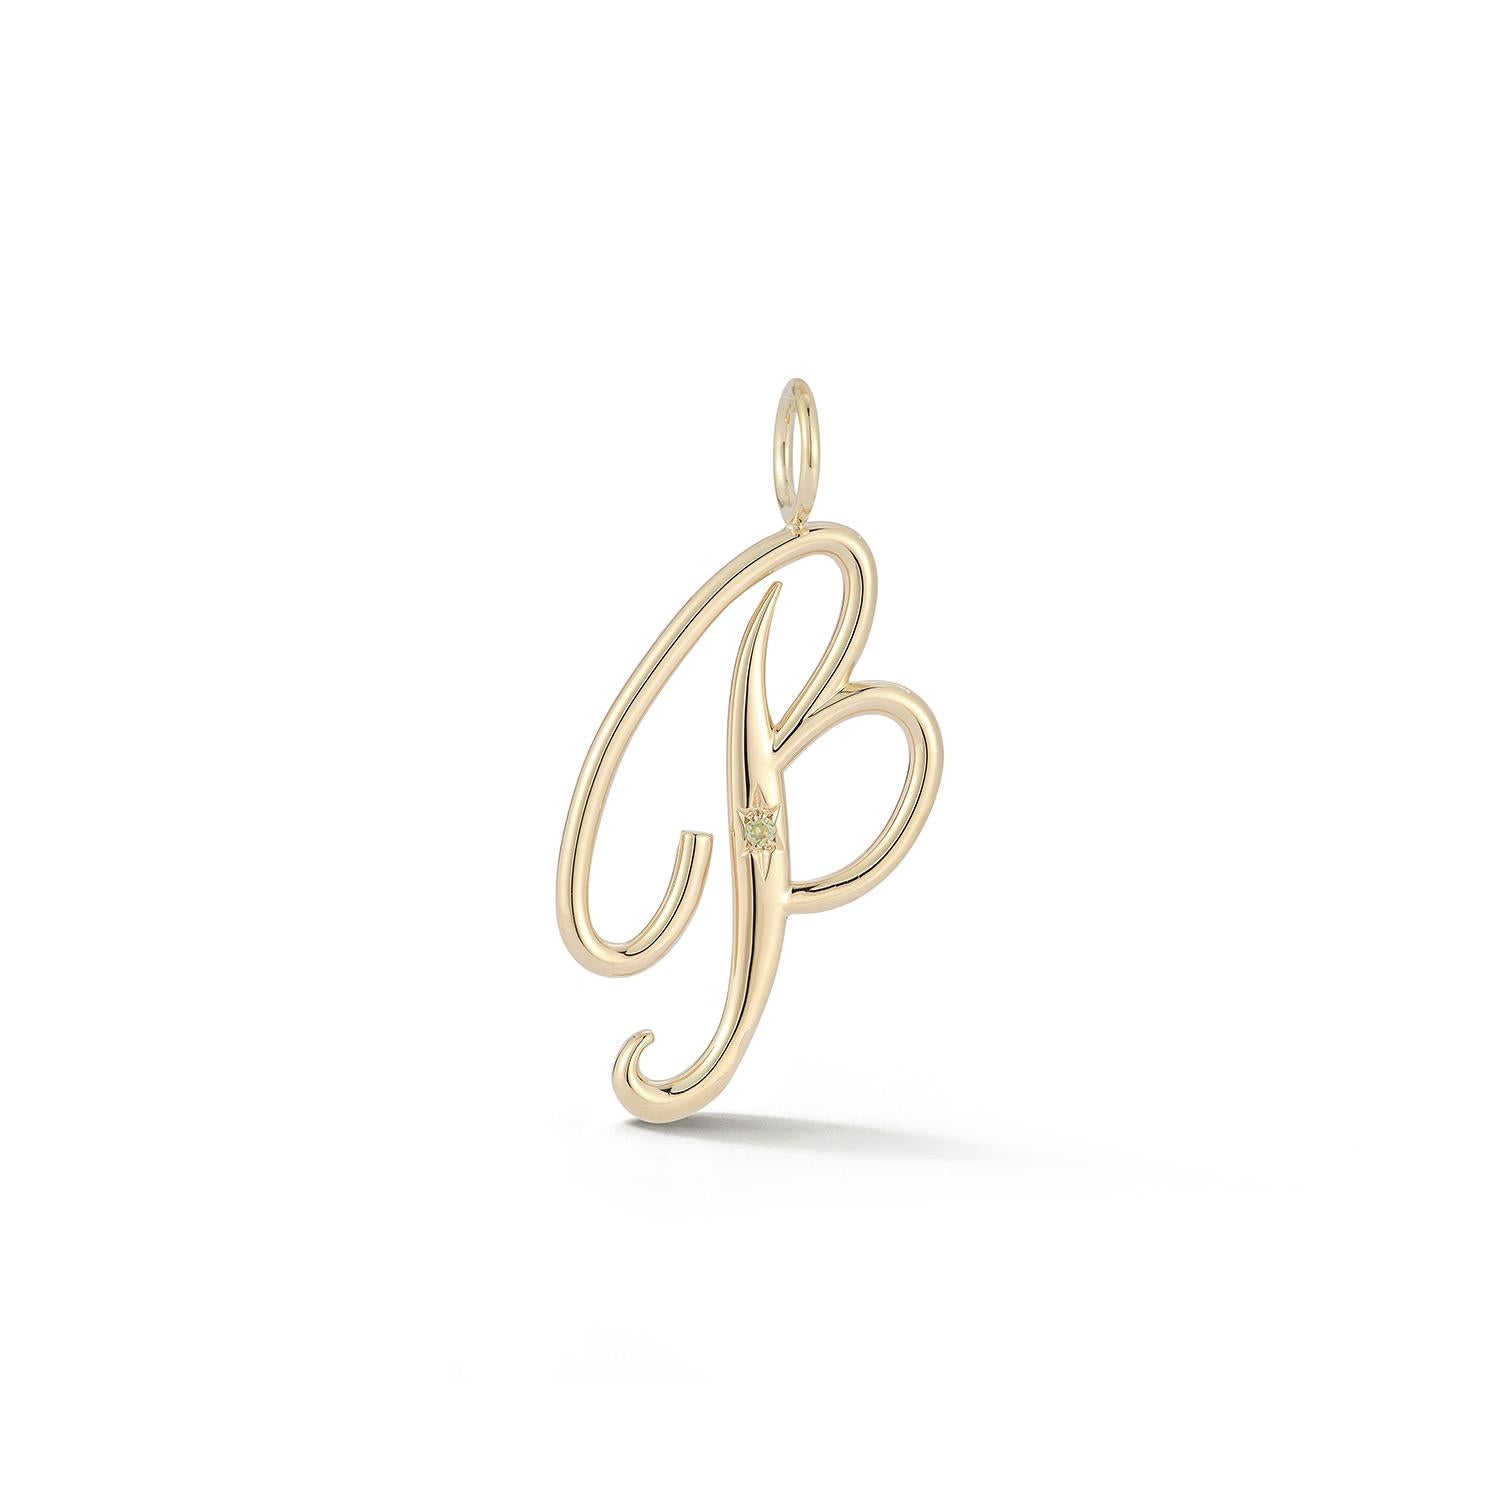 Custom designs for the most special family were unveiled to such fanfare that we decided to add this new lettering to our permanent collection of pendants and charms.Each solid gold script letter is made to order in New York City and set with a